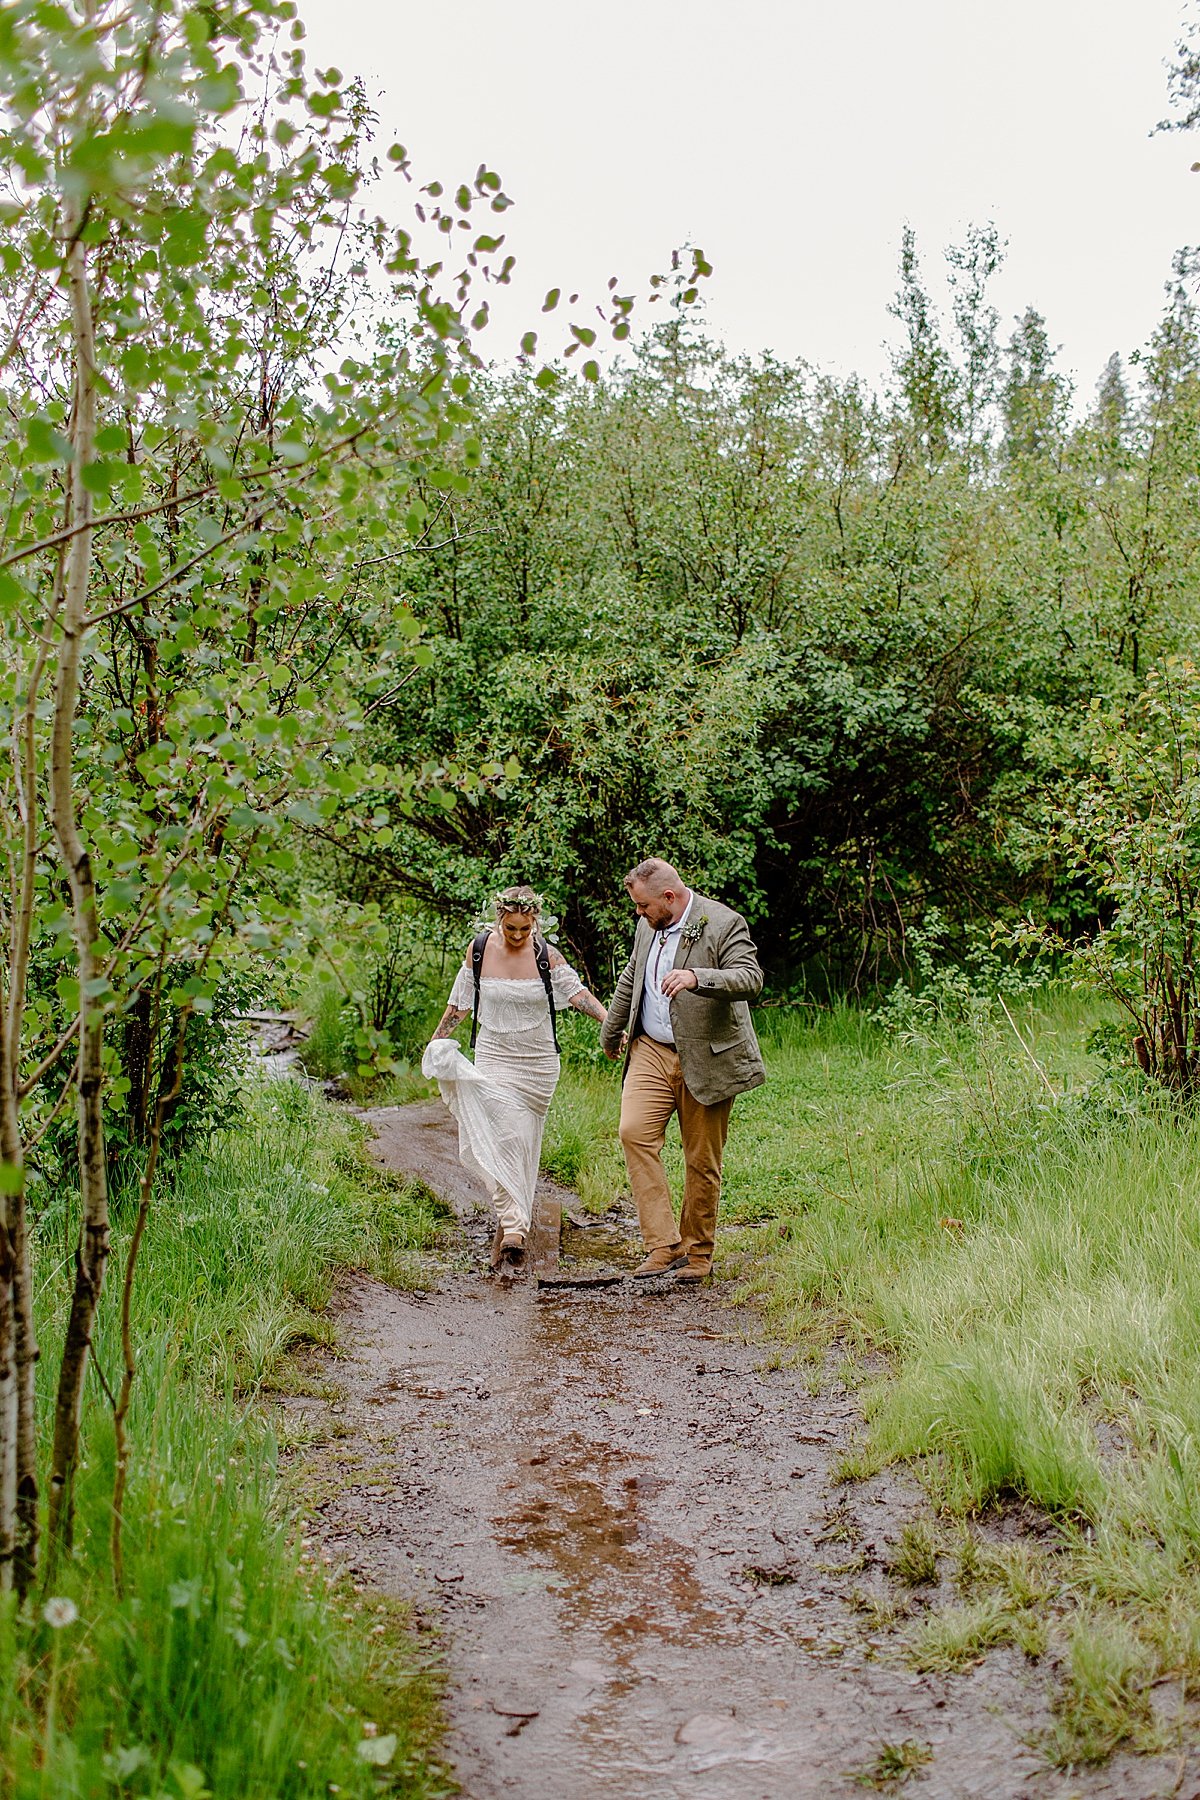  Walking through mud towards ceremony elopement location in wedding dress attire  by Lucy Bouman 